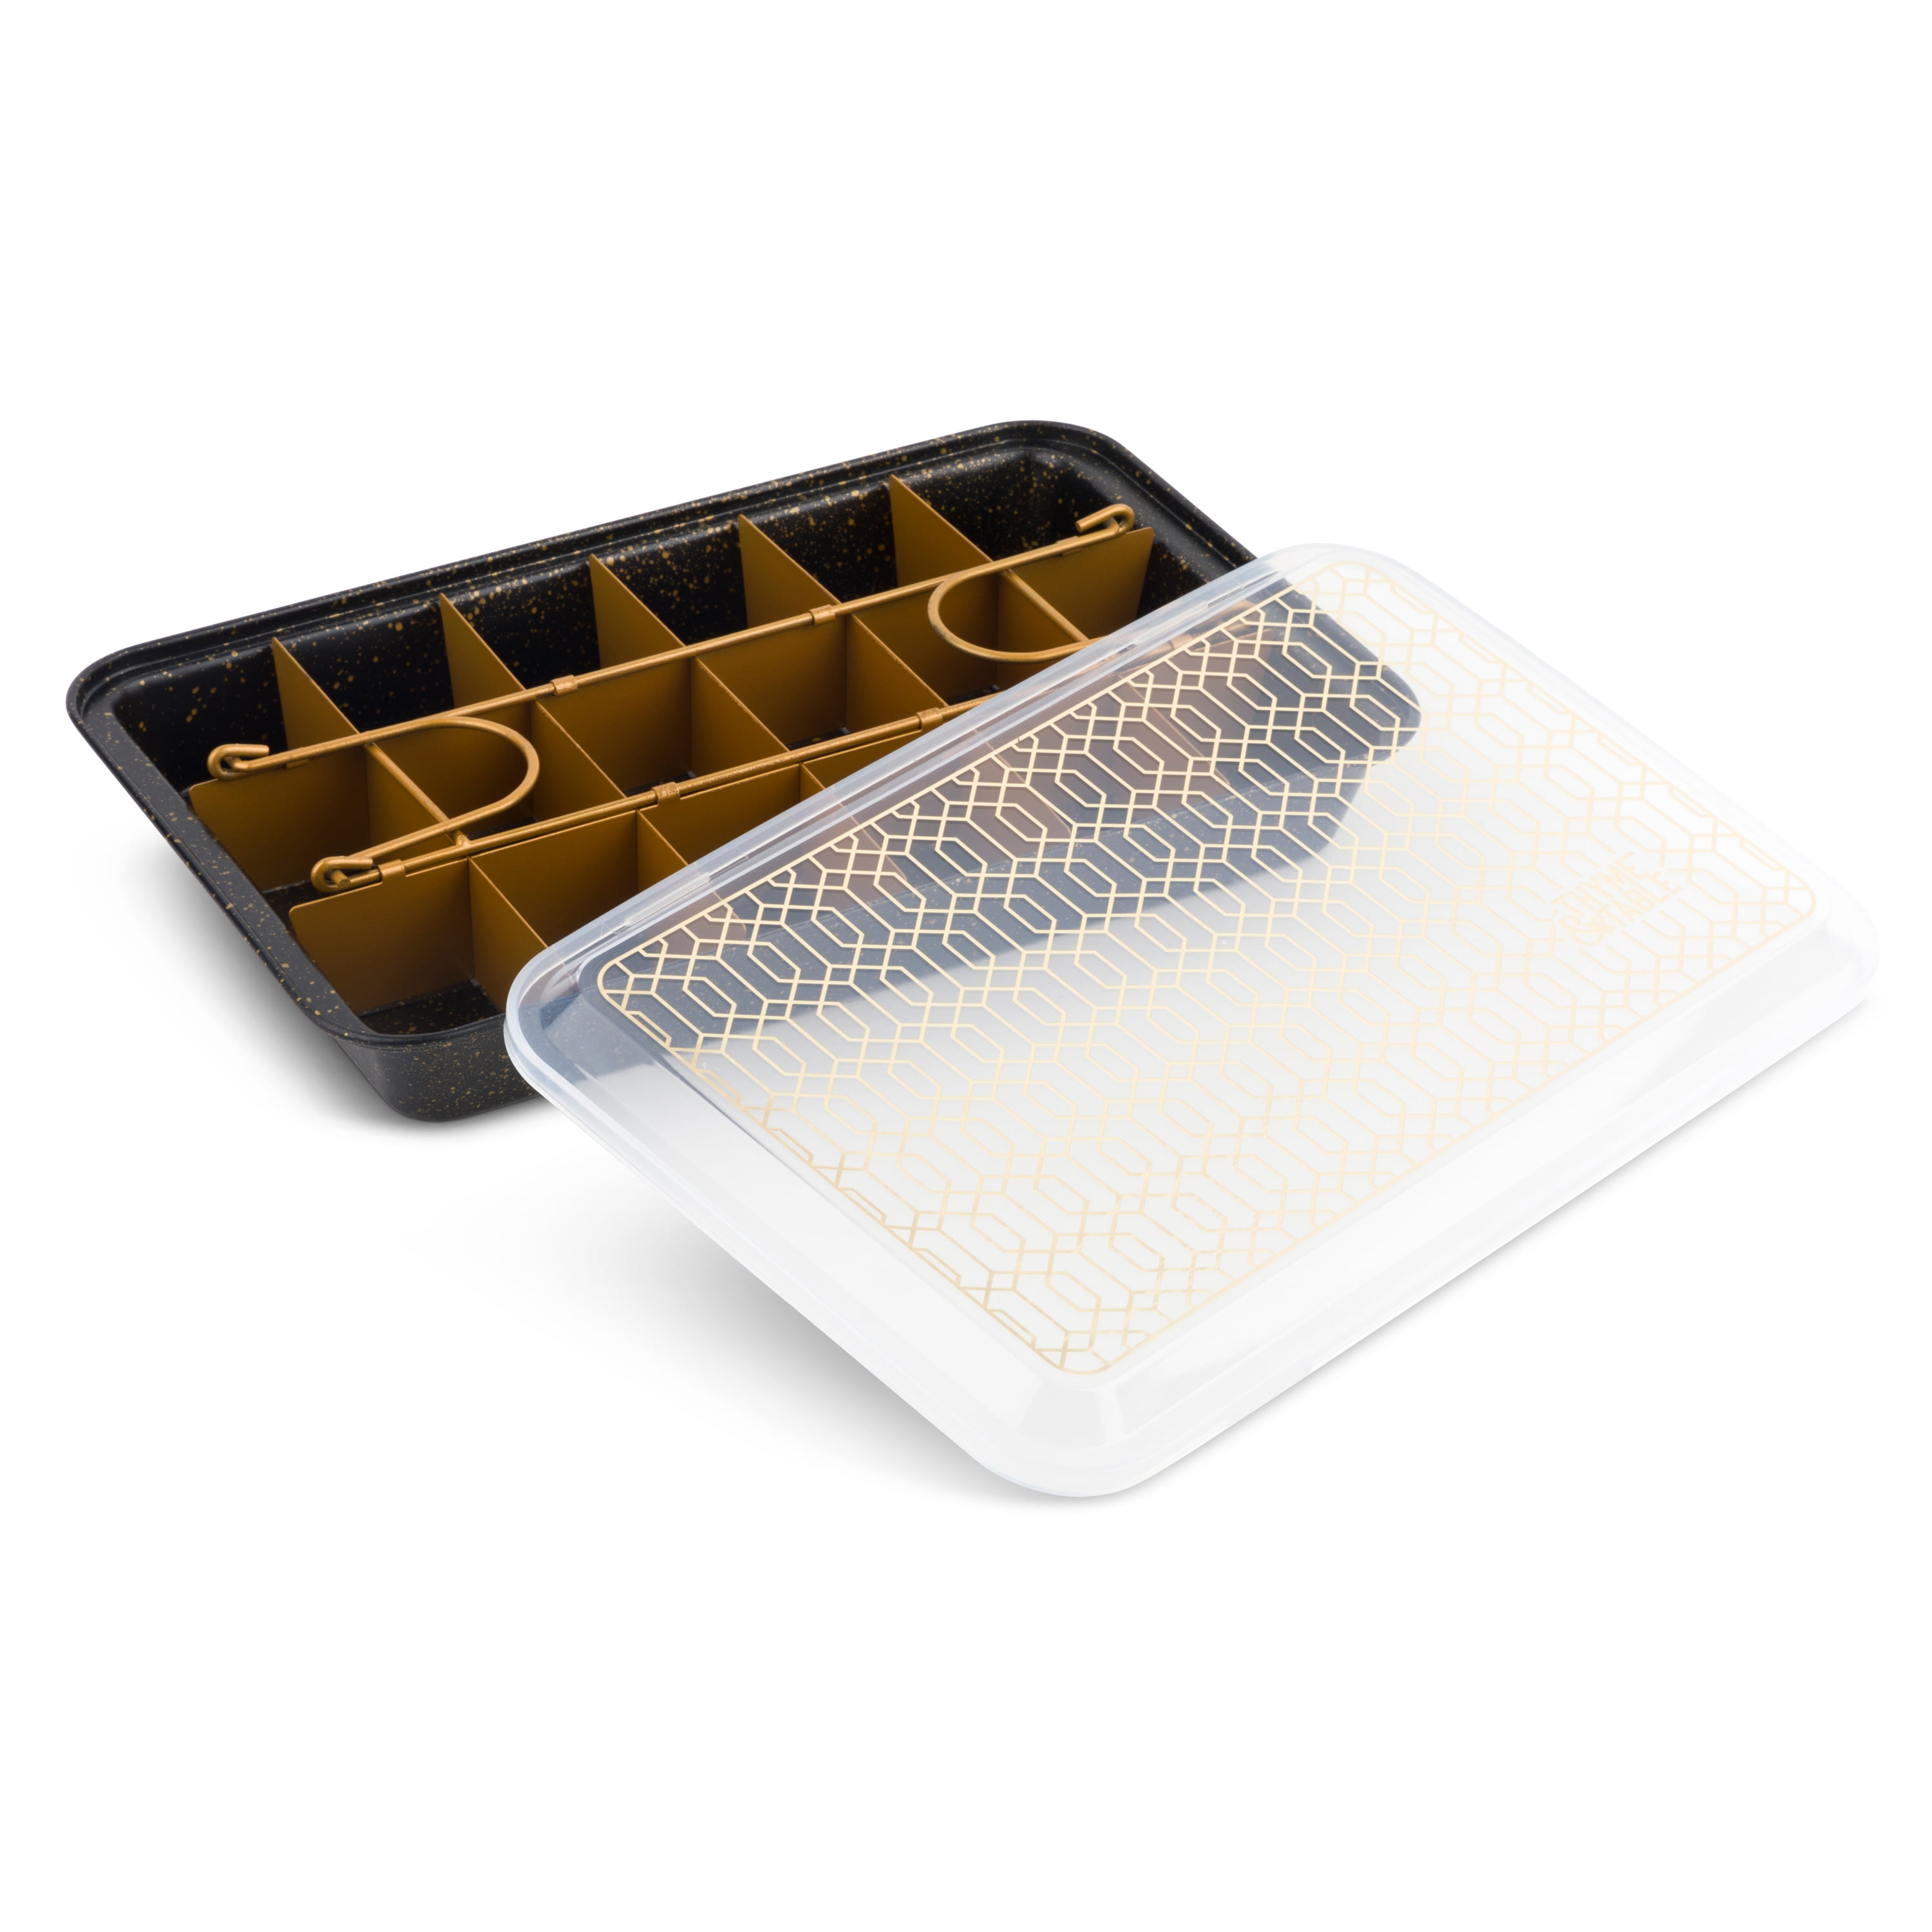 Thyme & Table Silicone Ice Cube Tray, 2-Piece Set 